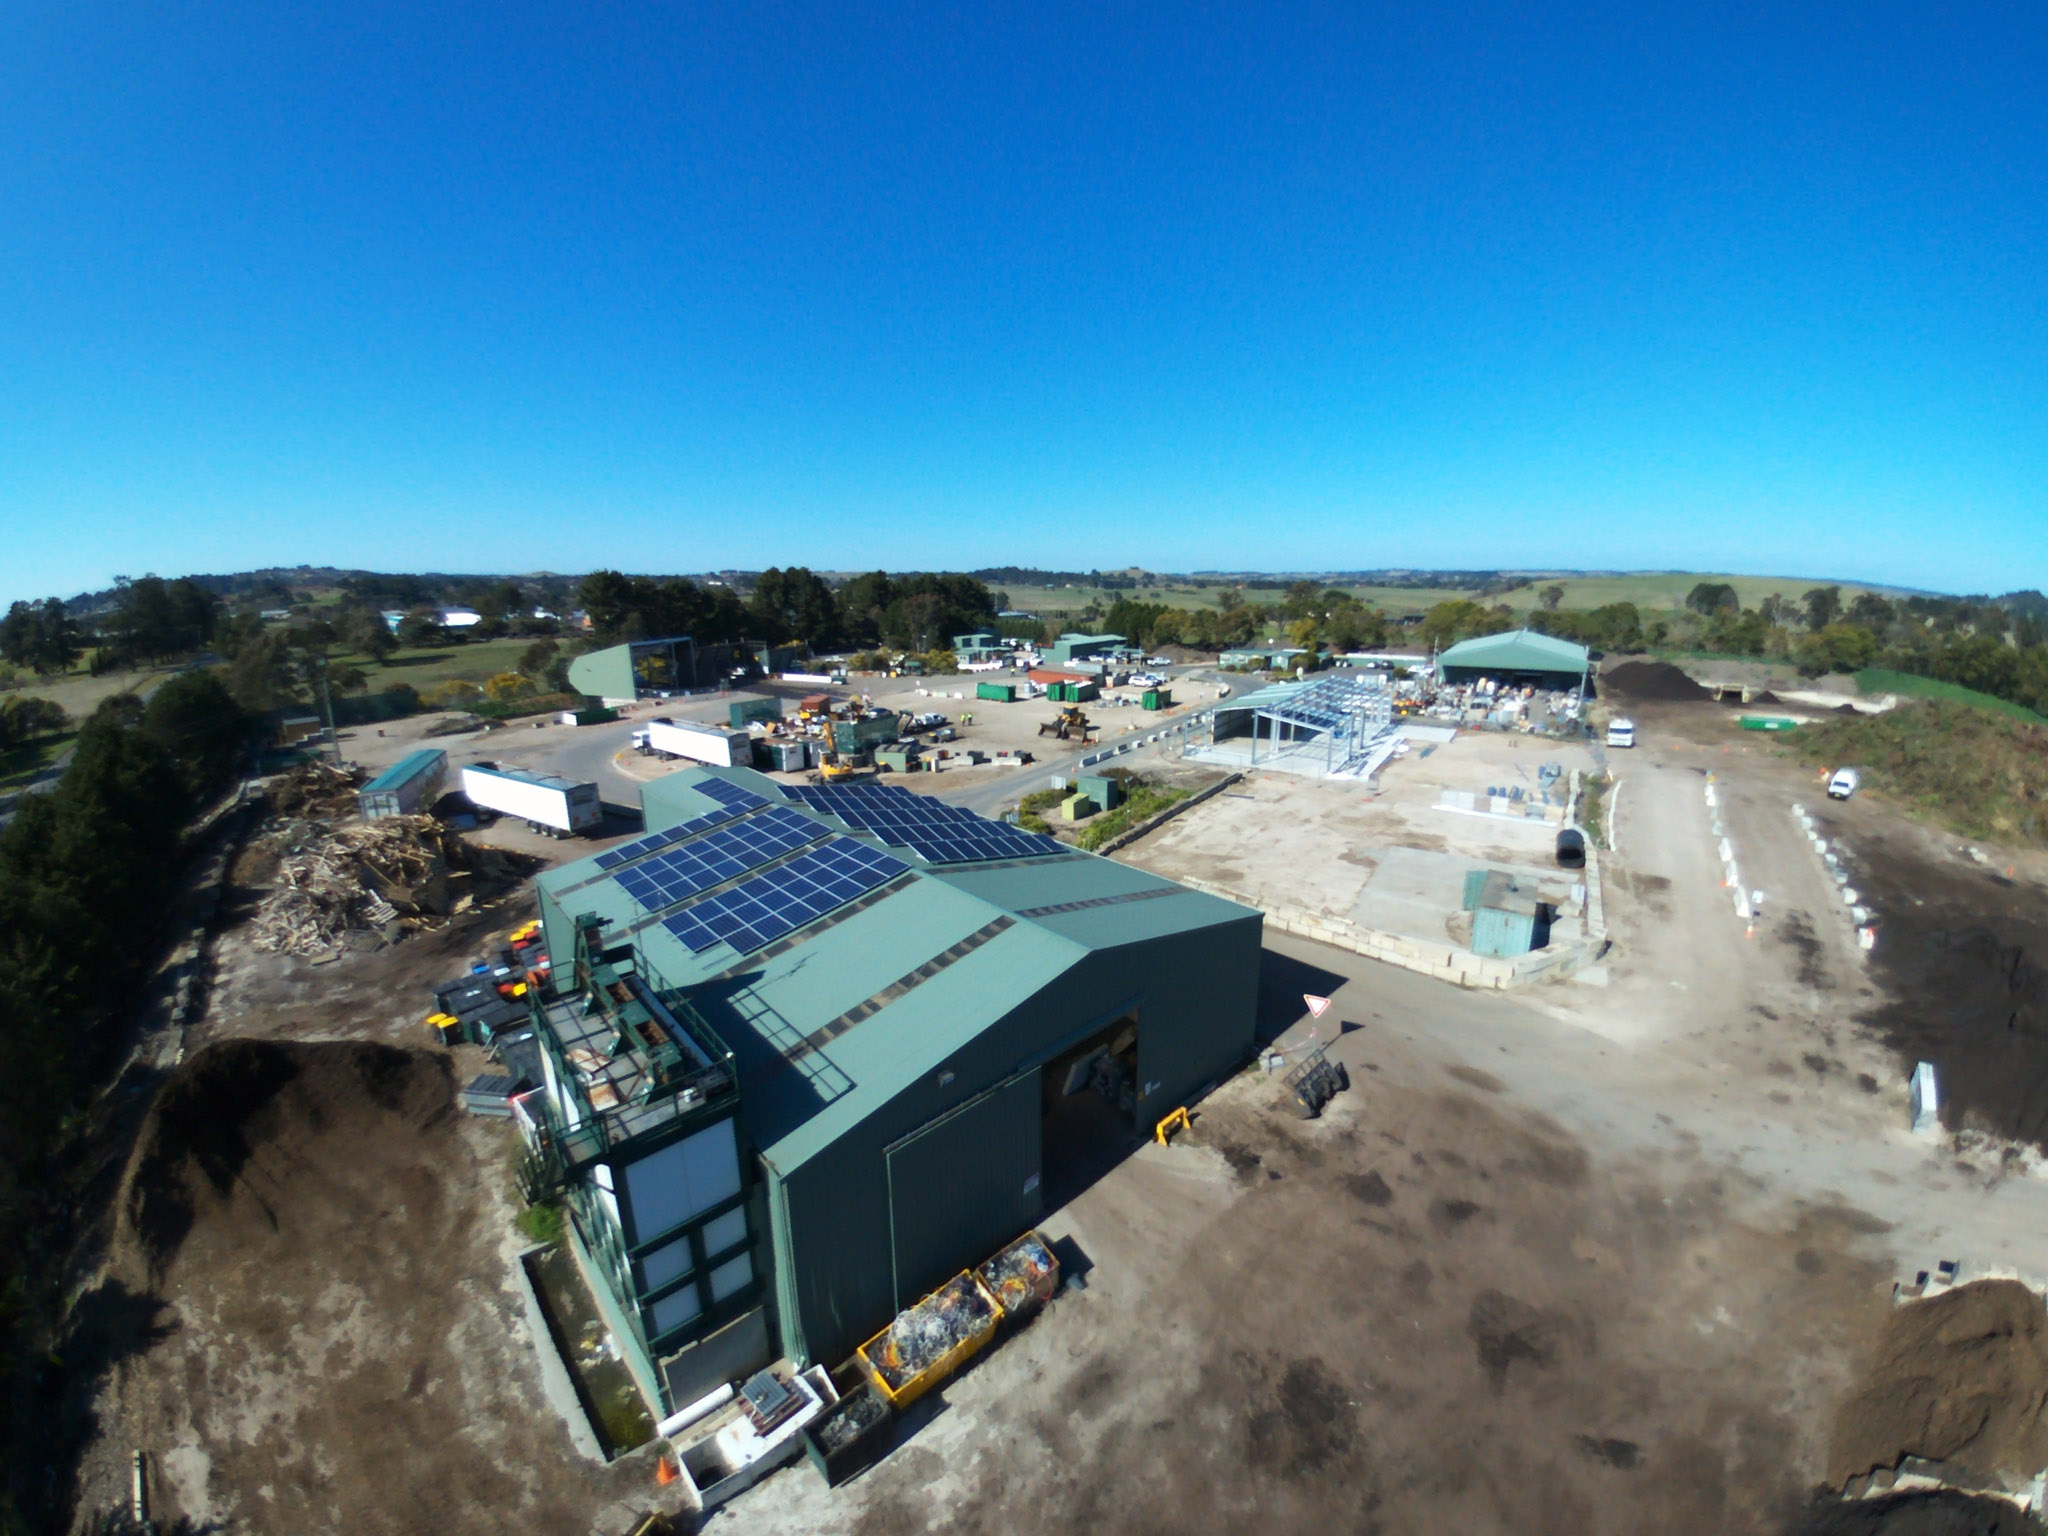 Aerial shot of the RRC in Moss Vale